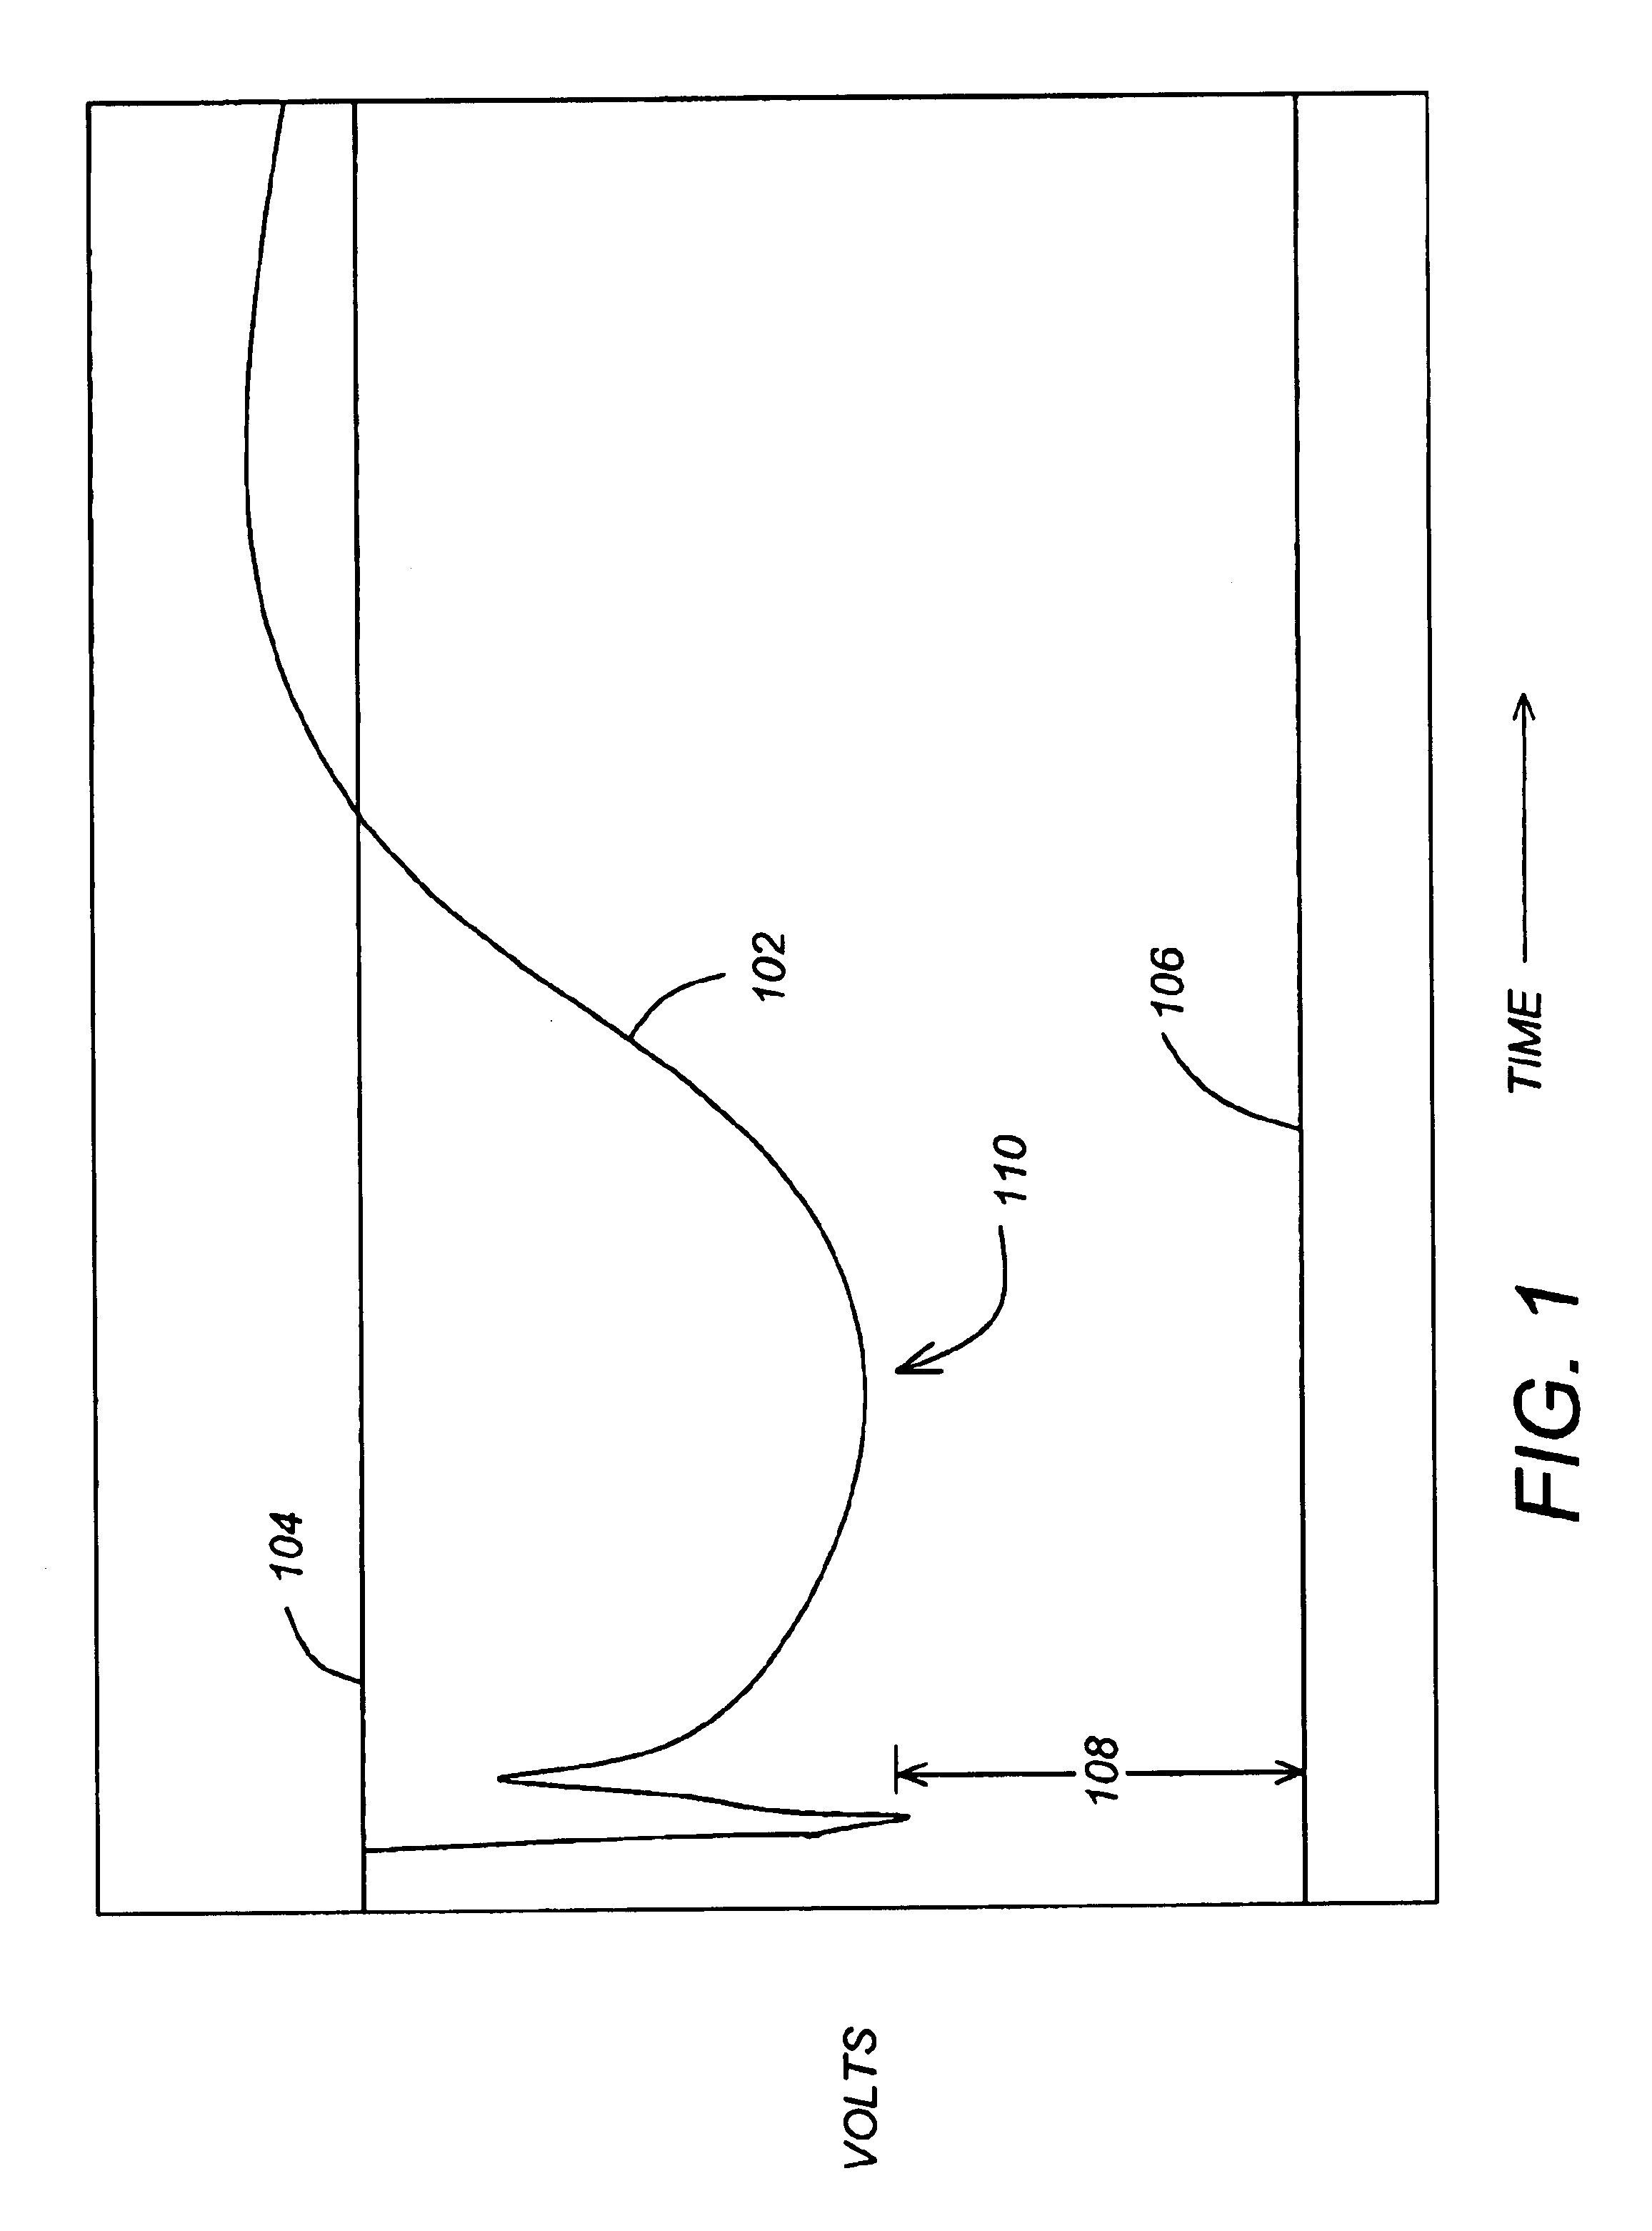 Method and apparatus for providing power to a microprocessor with integrated thermal and EMI management